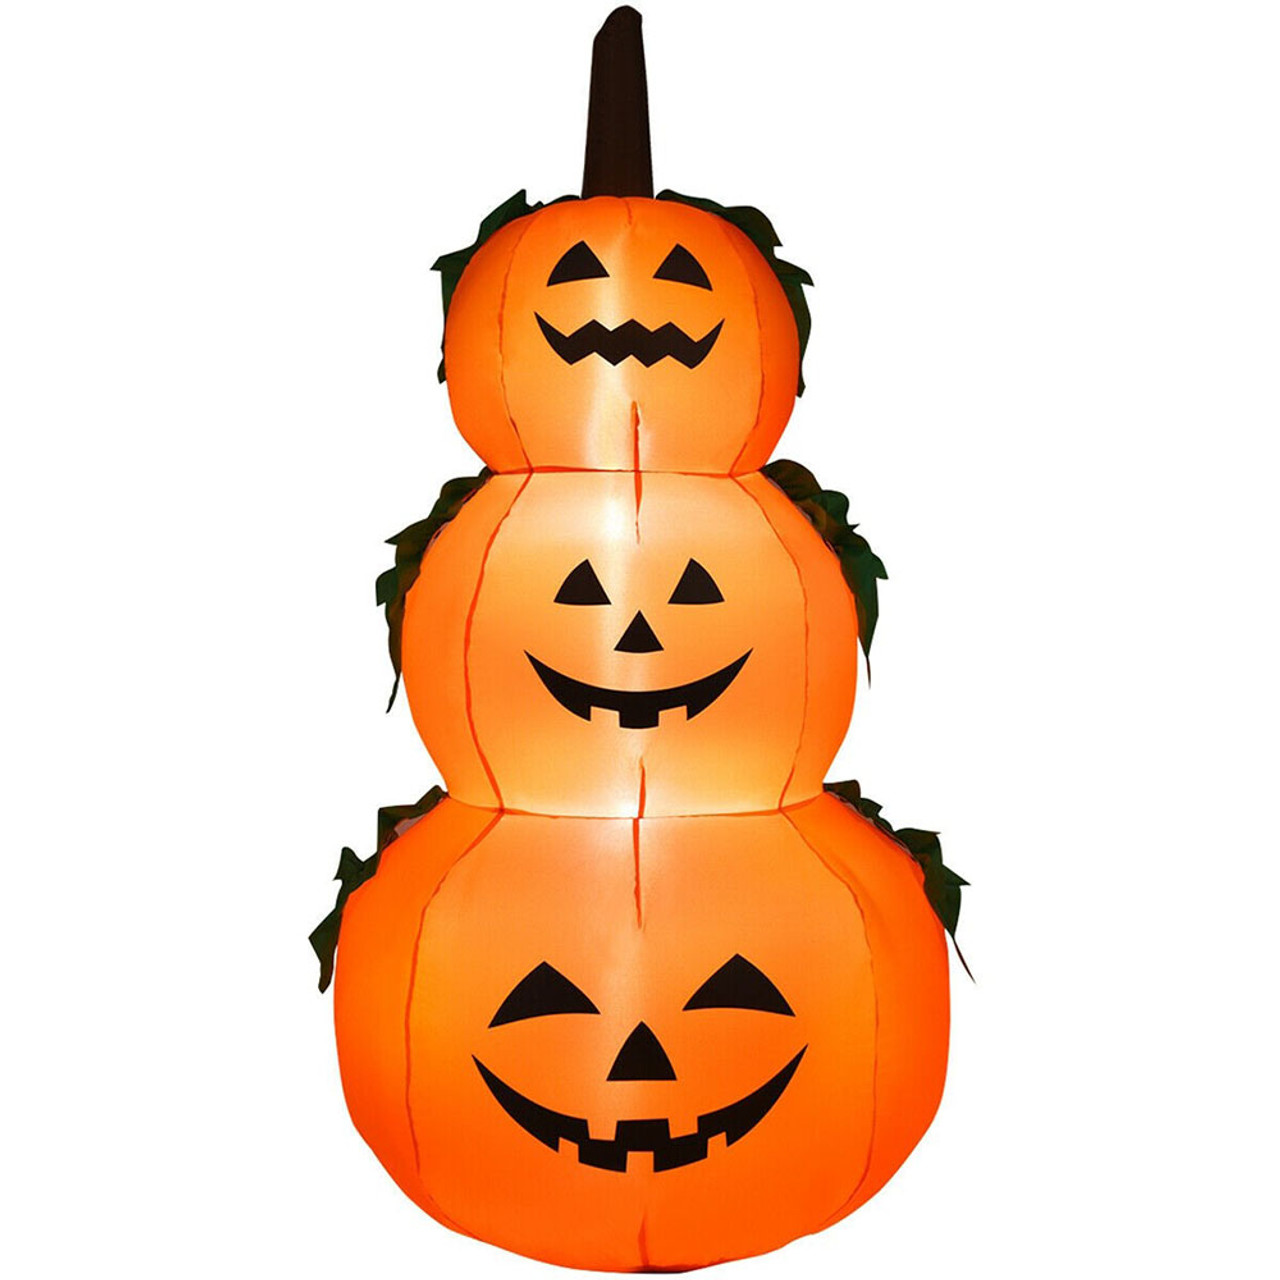 6-Foot Inflatable LED Halloween Yard Decoration product image